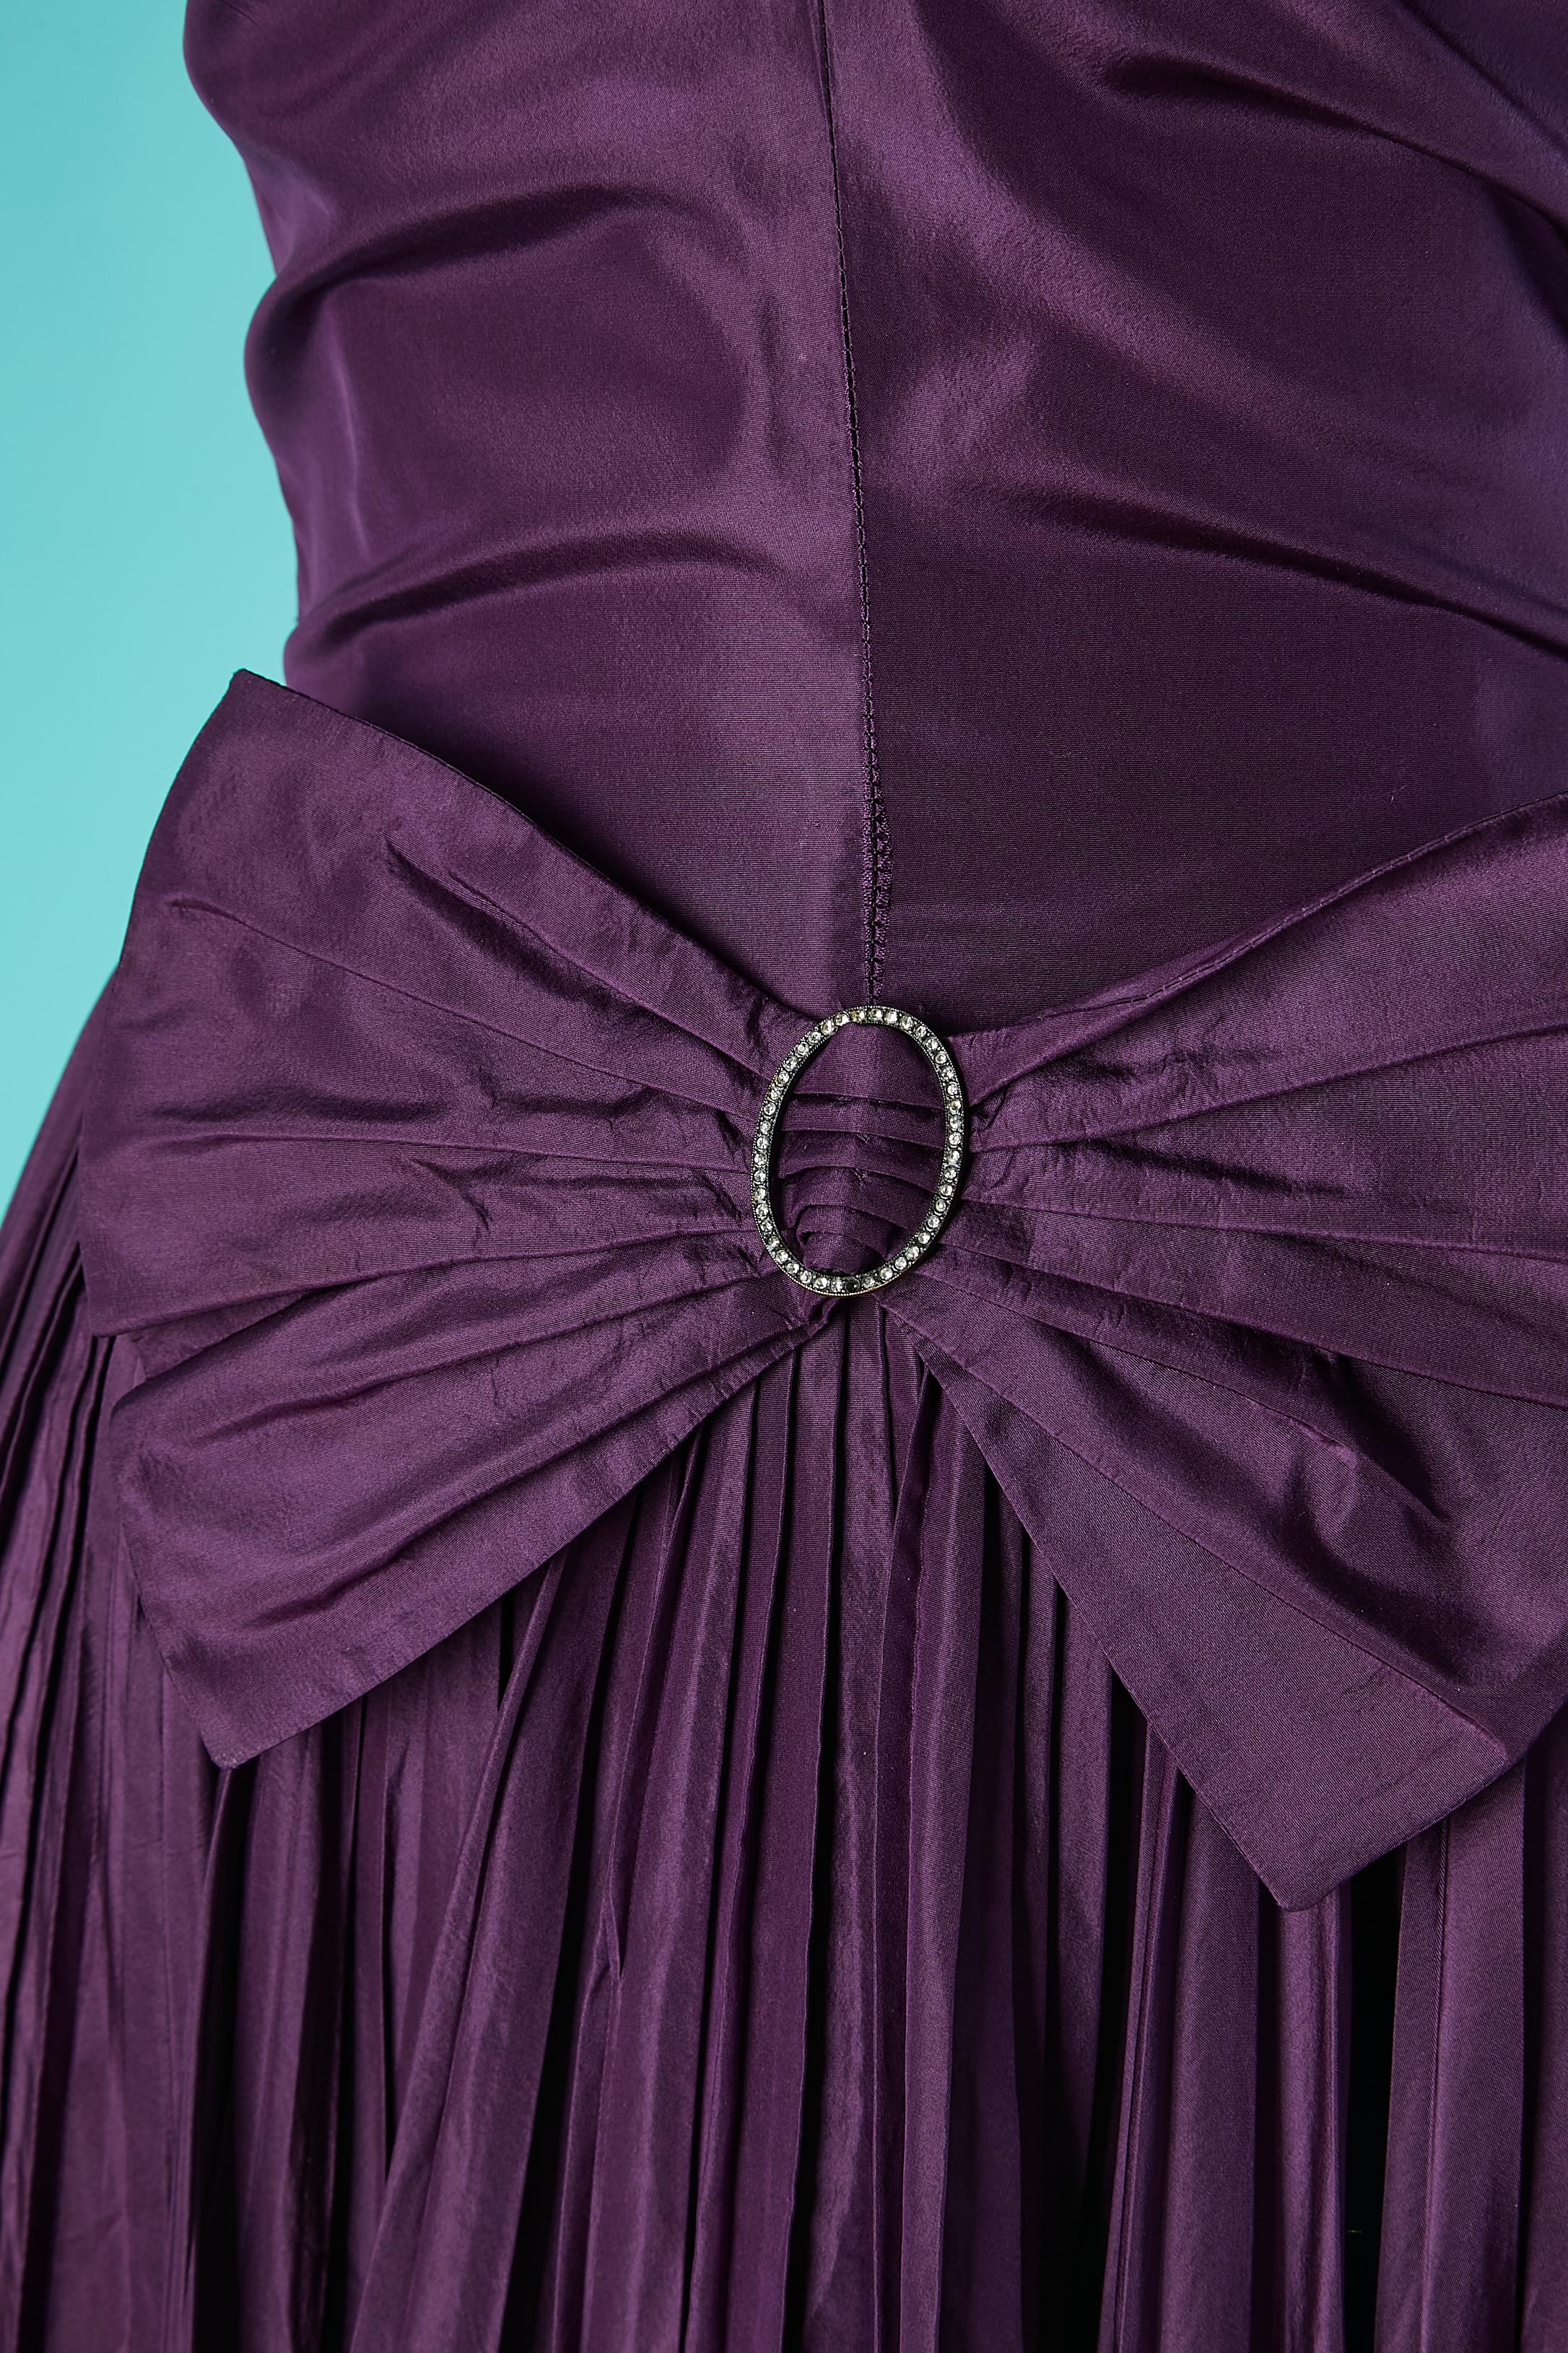 Purple silk bustier cocktail dress with bow and pleated skirt. Orange silk lining and petticoat. Draped on the bust. Boned.
Zip and hook&eye closure in the middle back. 
SIZE XS 